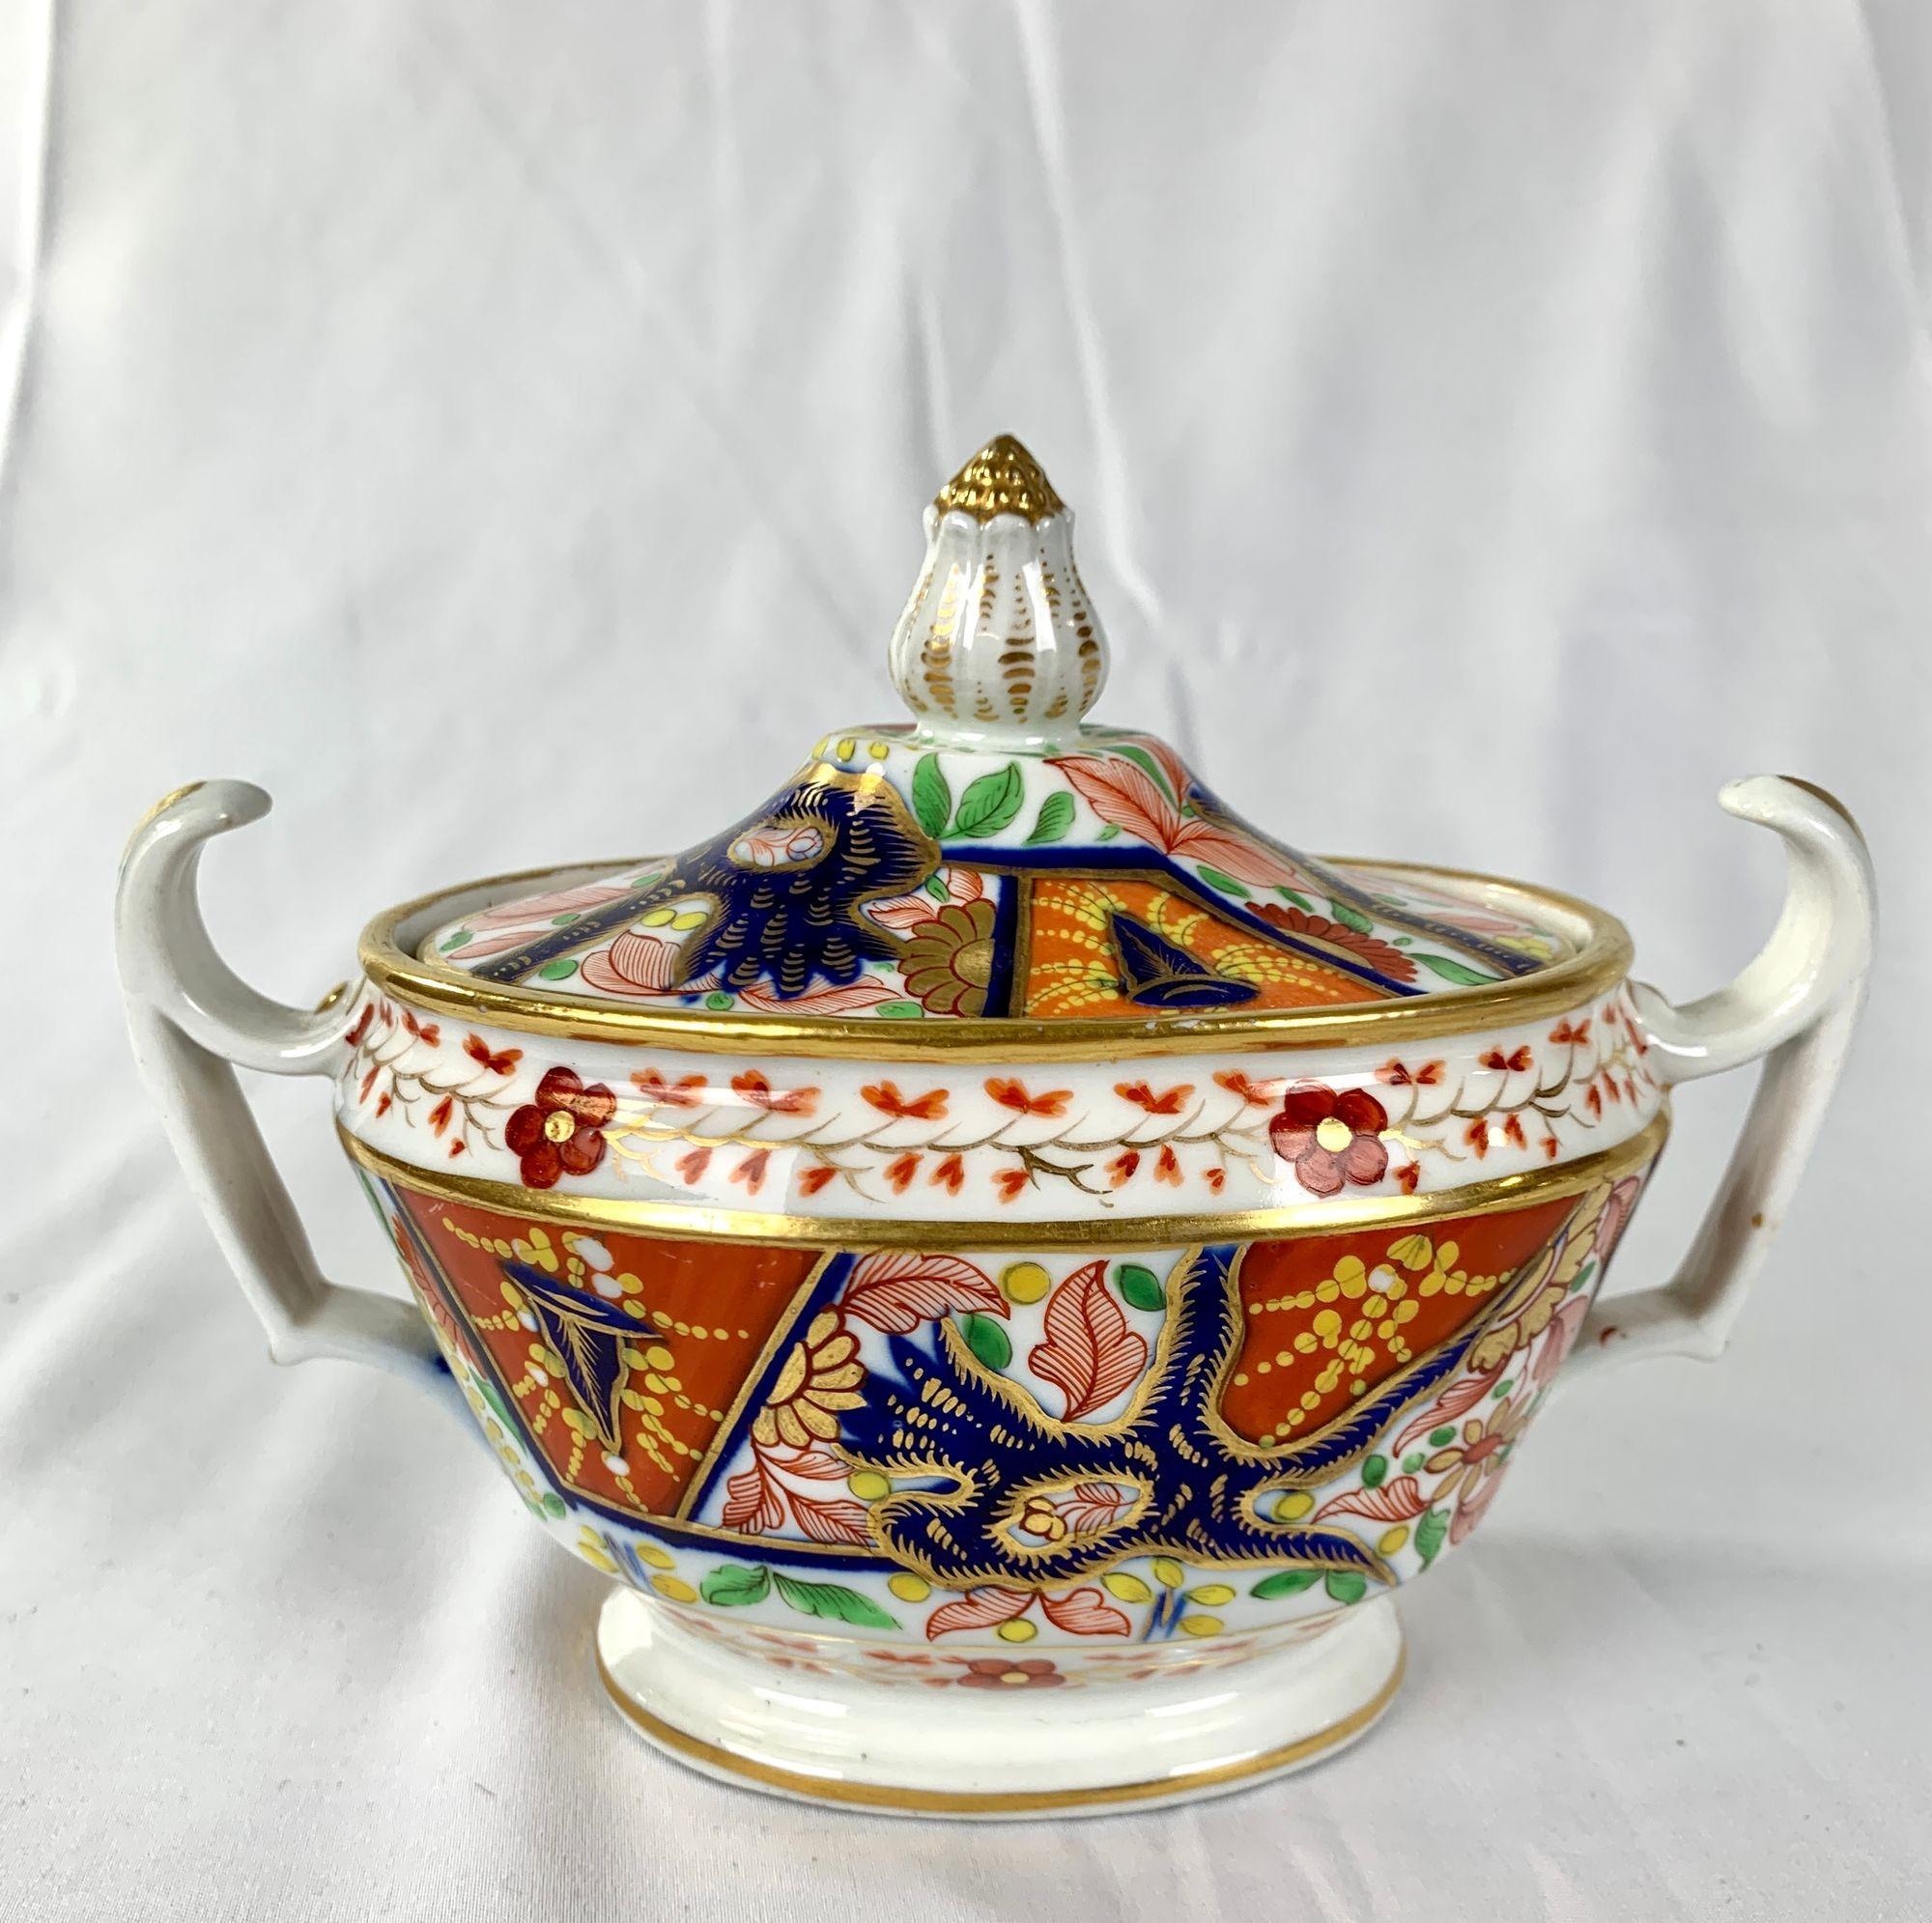 This colorful porcelain sugar box was hand-painted in England circa 1825.                                                                                                                        The exciting design is Imari influenced. The colors seem